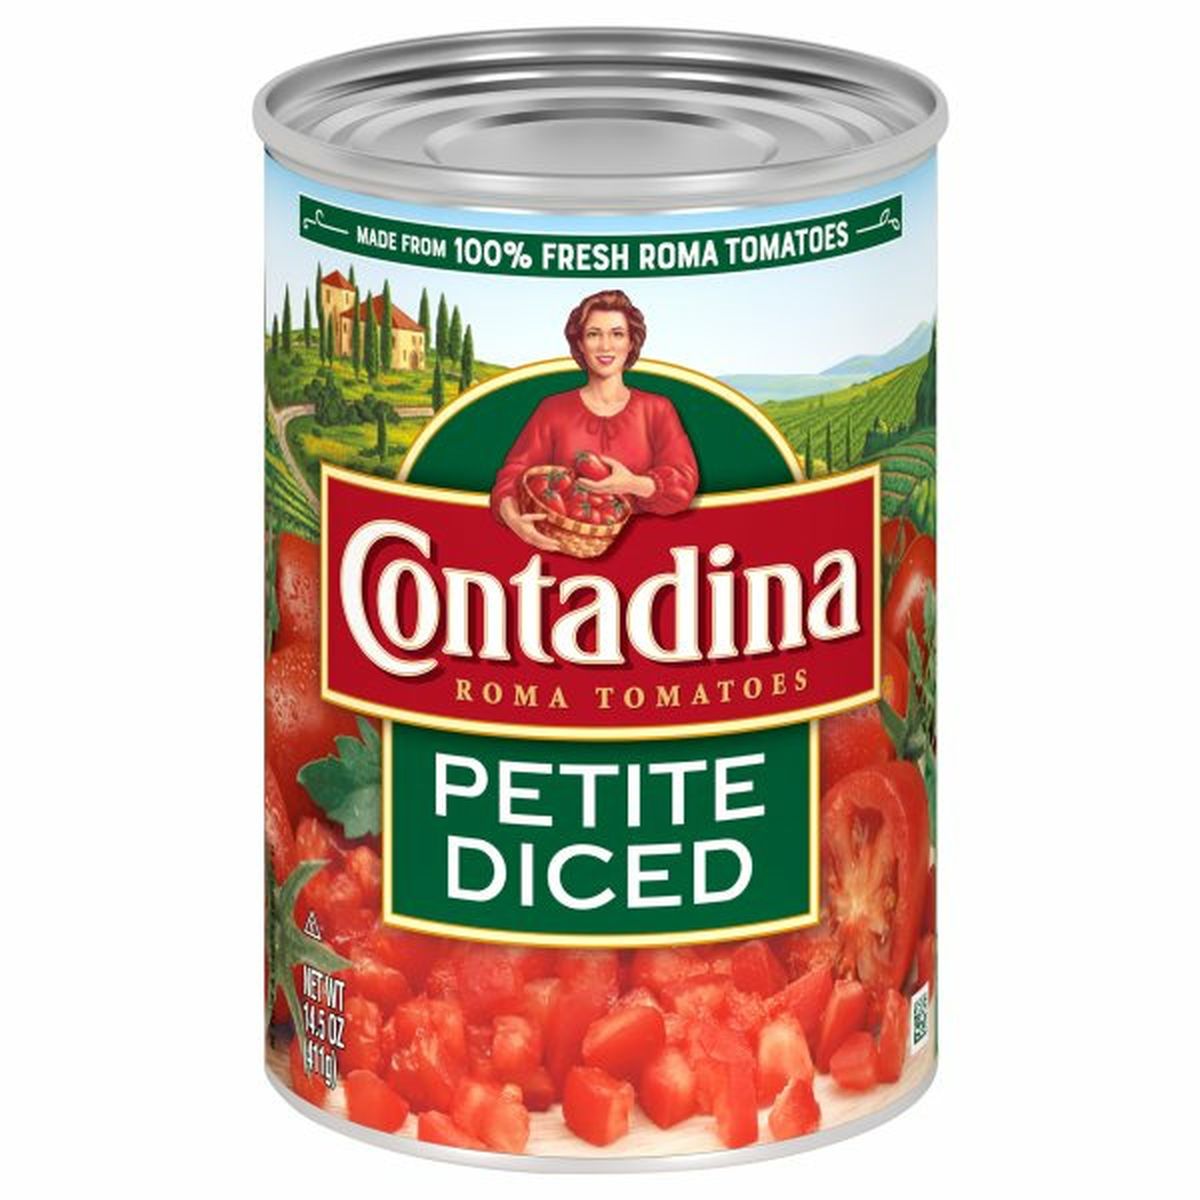 Calories in Contadina Roma Tomatoes, Petite Diced